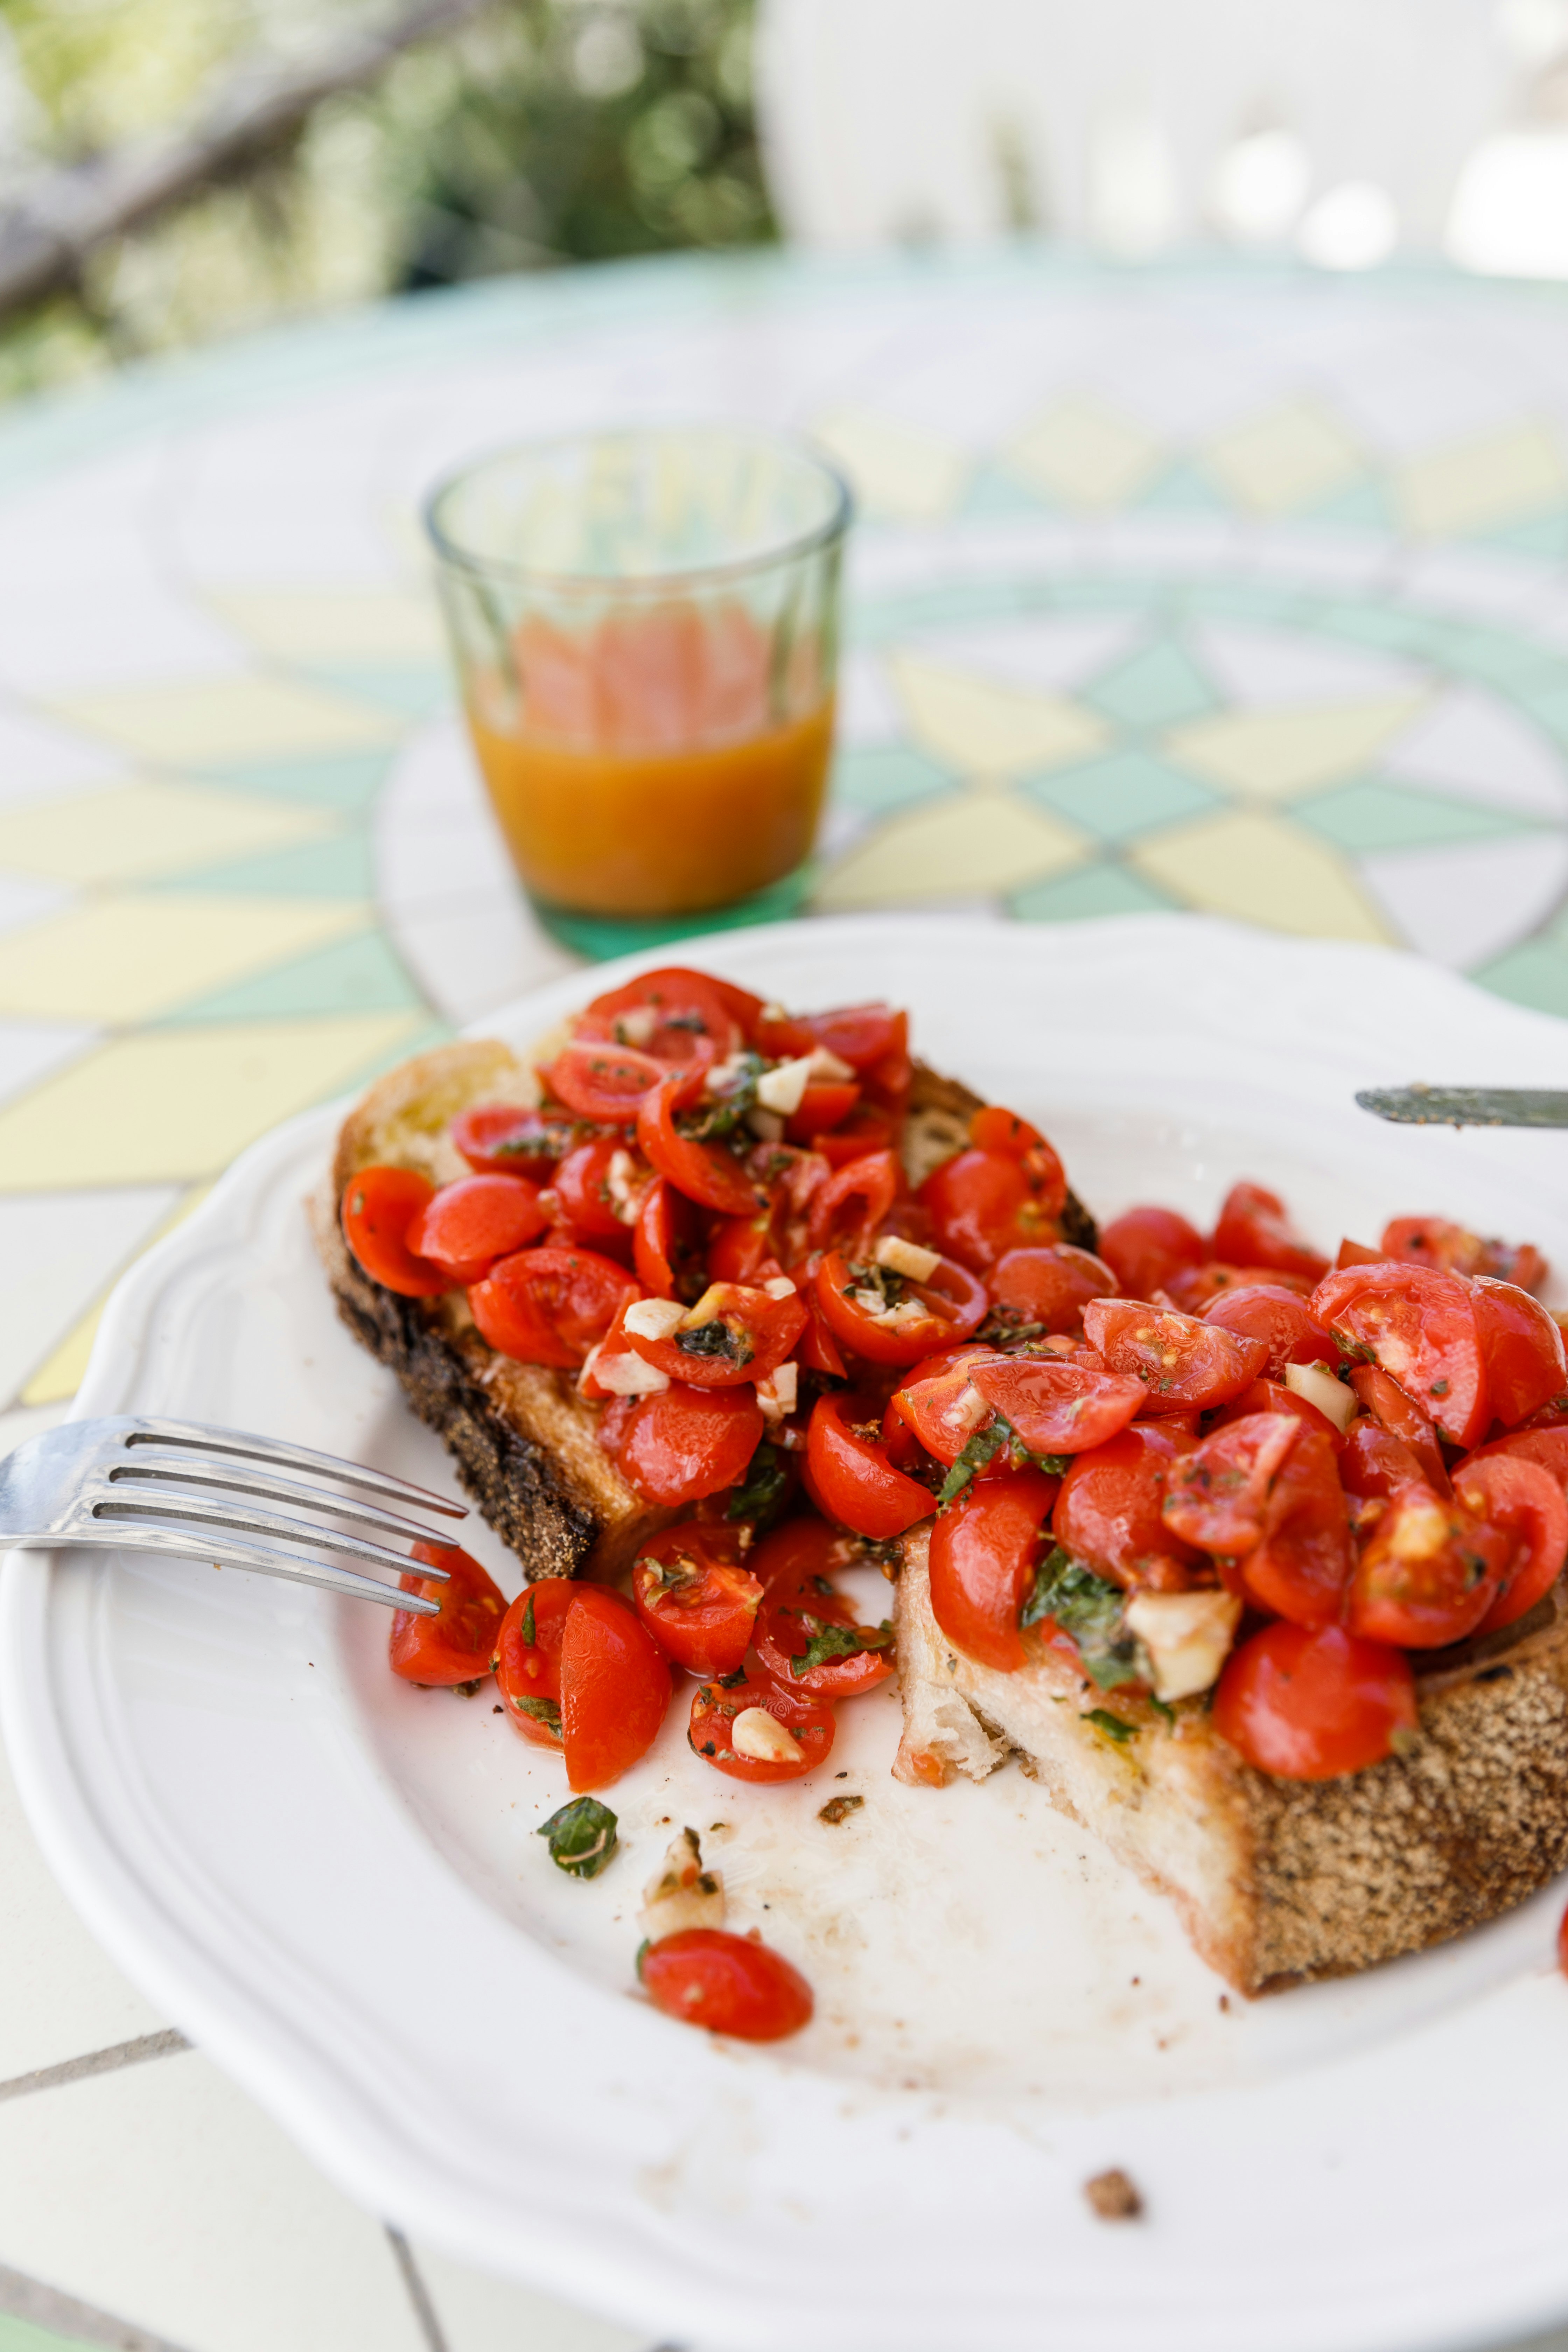 A close up shot of two slices of bruschetta. The crusty bread is piled with tomatoes, oil and garlic on a colourfully-tiled table with a glass of juice out of focus in the background. 